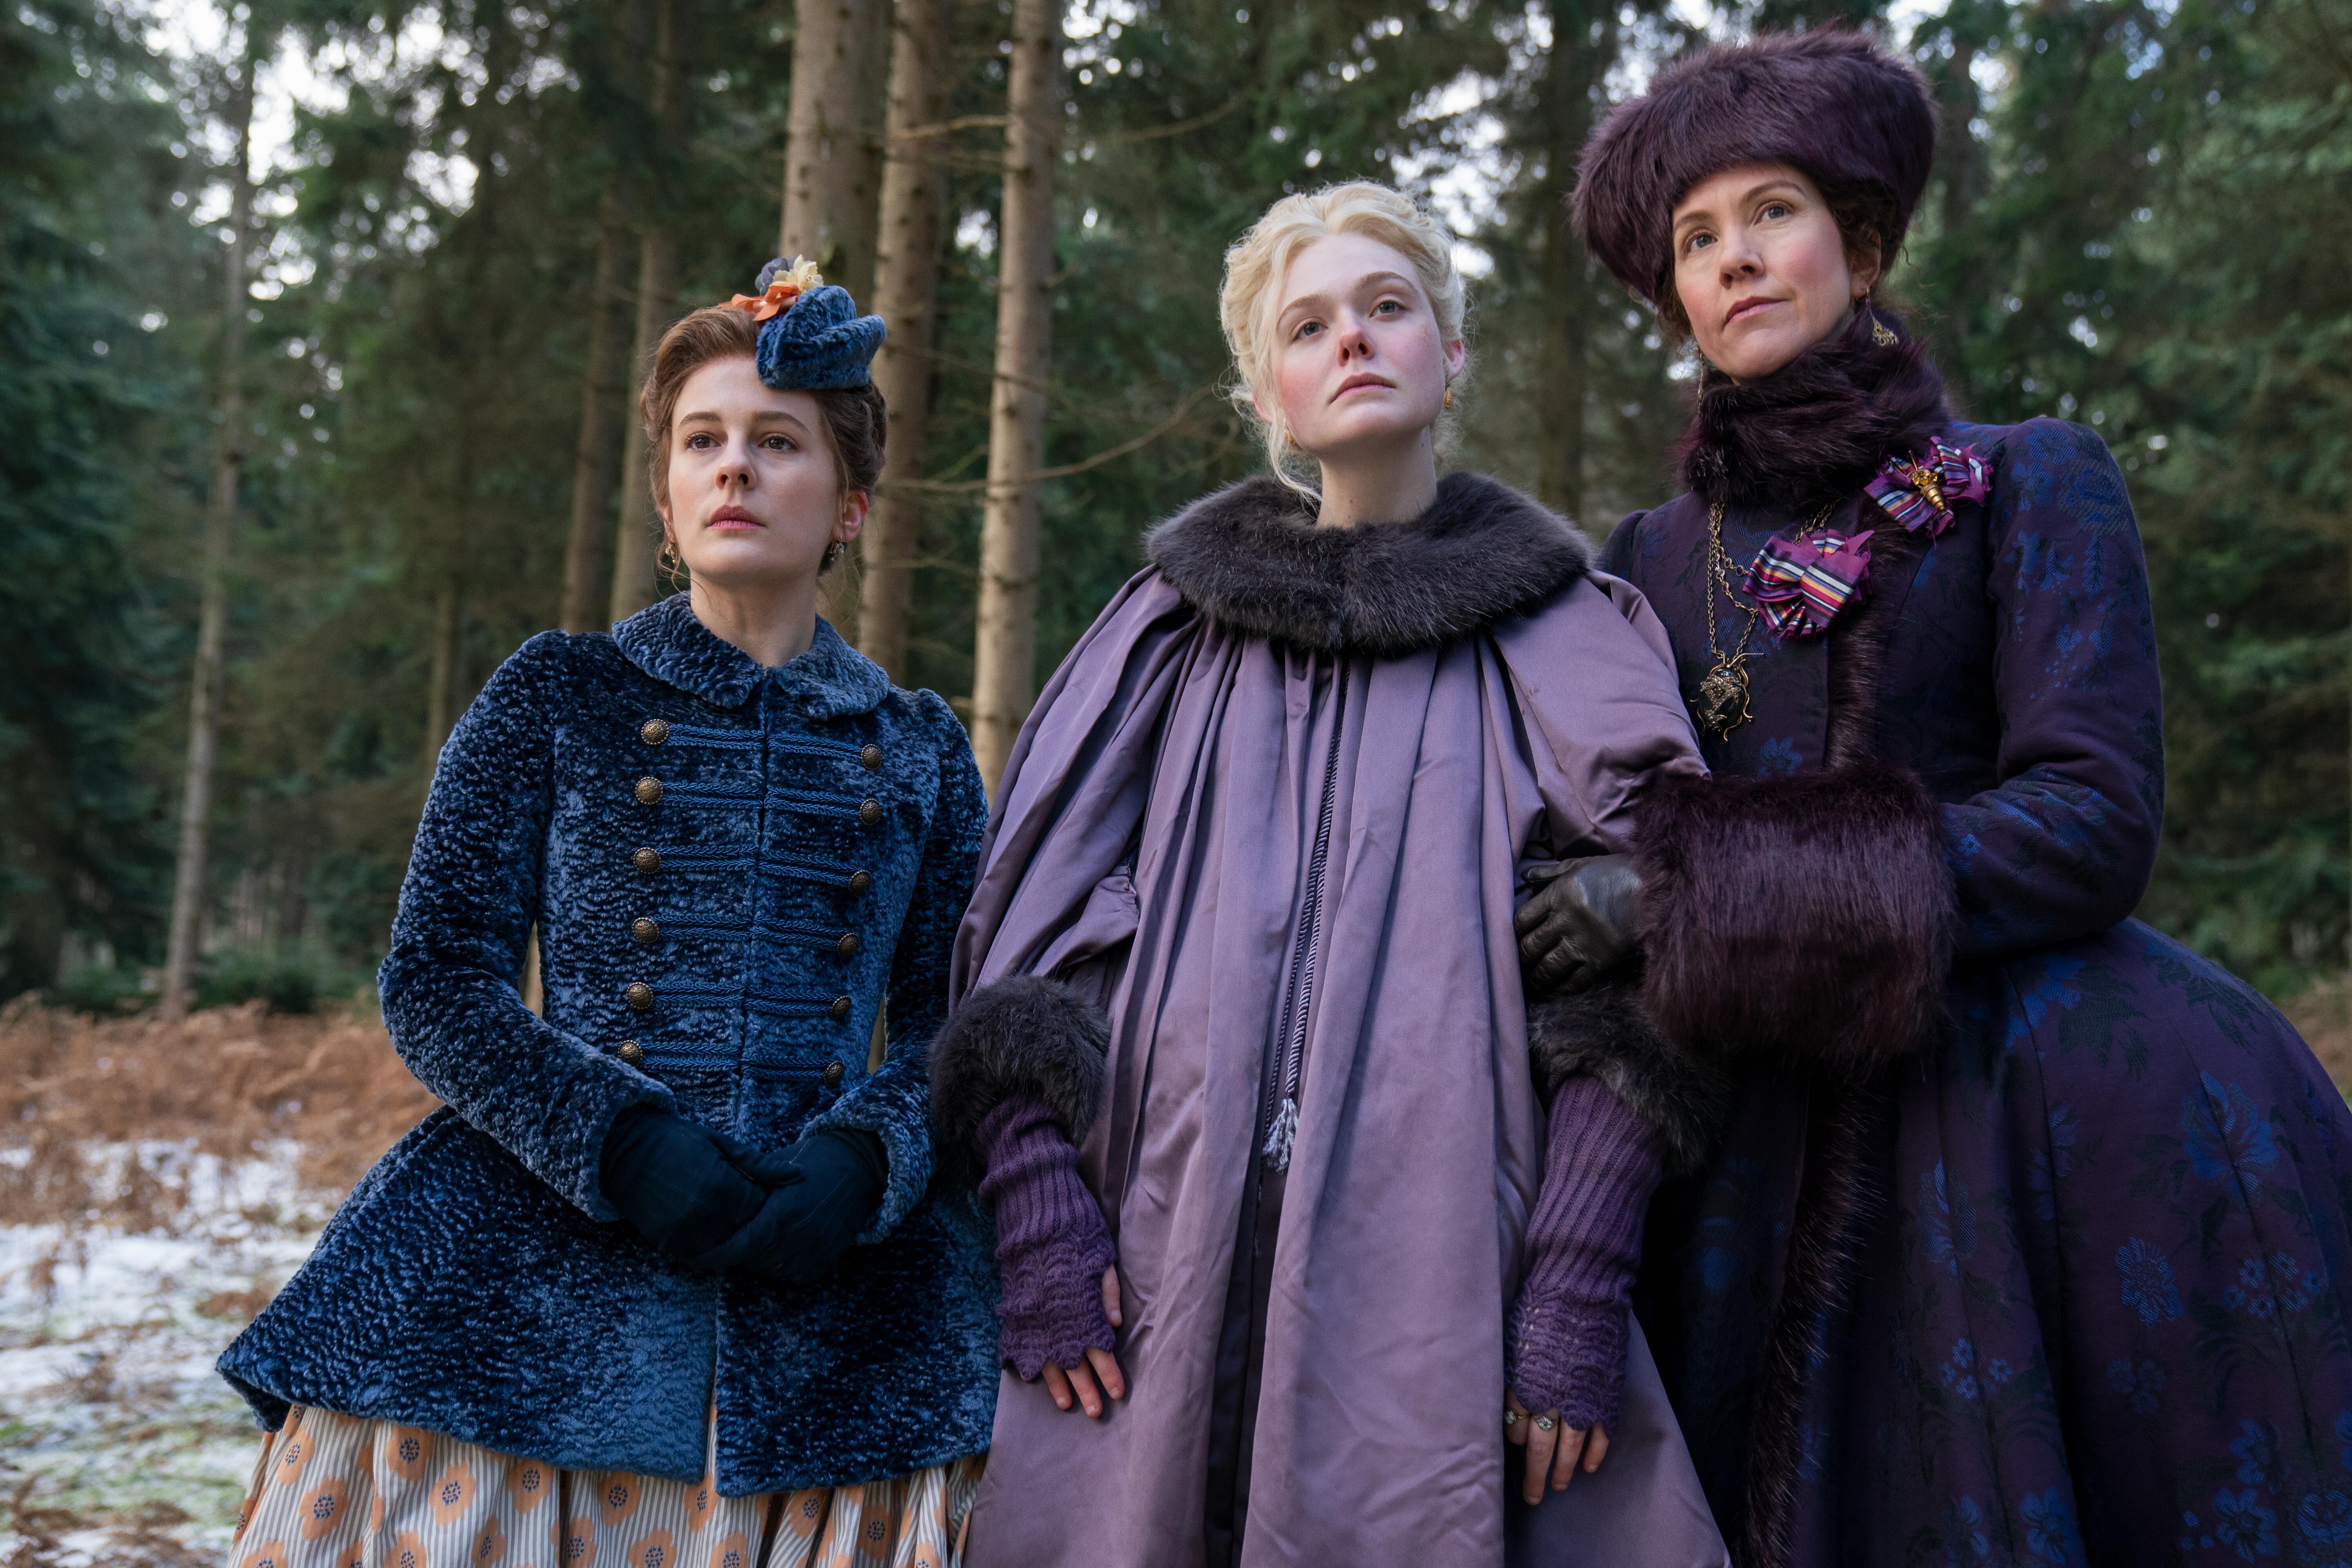 'The Great' cast members Phoebe Fox, Elle Fanning, and Belinda Bromiow standing outside